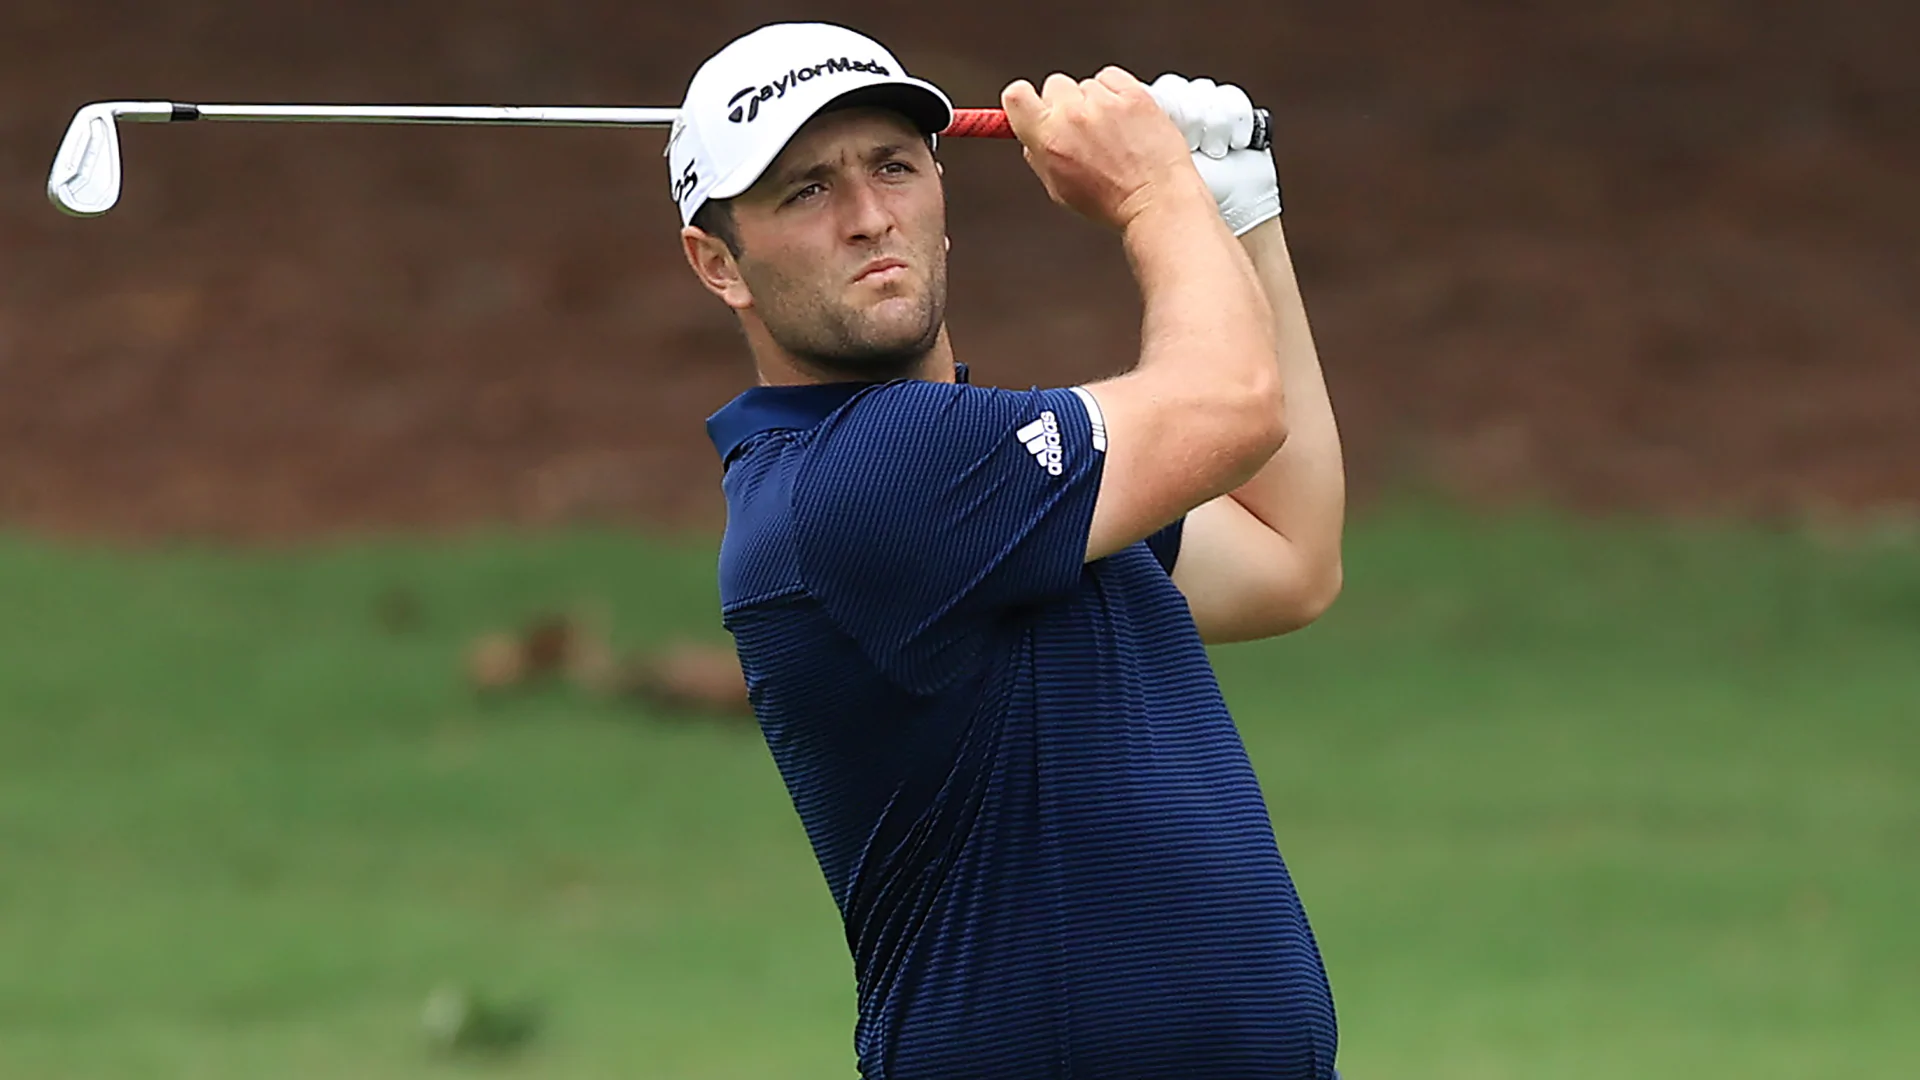 When it comes to tough tests, no one has excelled this year like Jon Rahm